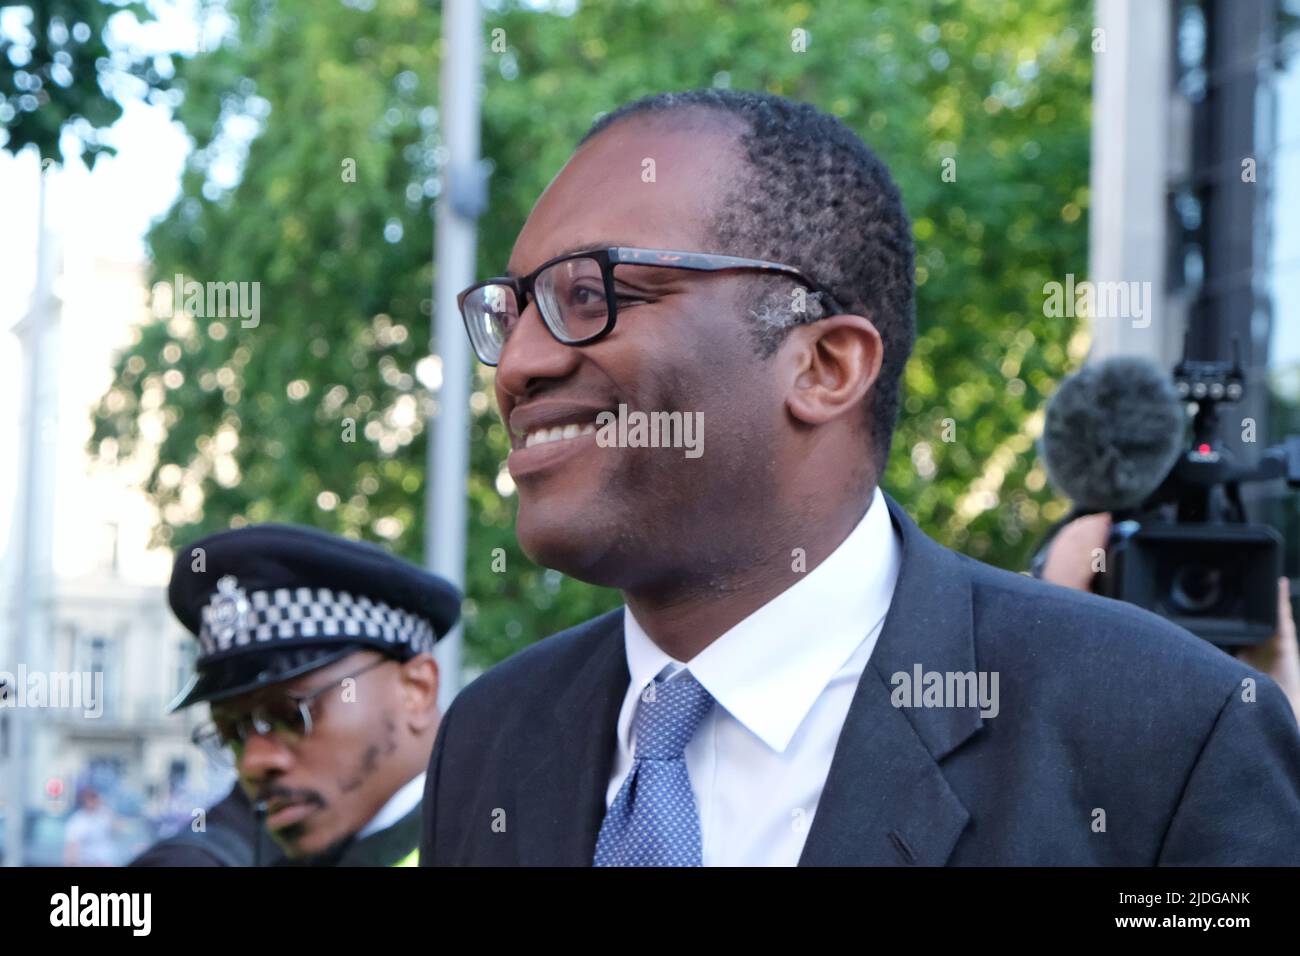 London, UK, 20th June, 2022. Secretary of State for Business and Energy Kwasi Kwarteng arrives for the Conservative Summer Party as culture sector workers from the Public and Commercial Services (PCS) union stage a pay protest outside the Victoria and Albert Museum, where the event was due to take place. Museum workers have been offered a 2% pay increase, though deemed inadequate as the Bank of England has predicted inflation will run at 11% by October. The annual event was attended by Cabinet ministers, MPs and Conservative Party donors. Credit: Eleventh Hour Photography/Alamy Live News Stock Photo